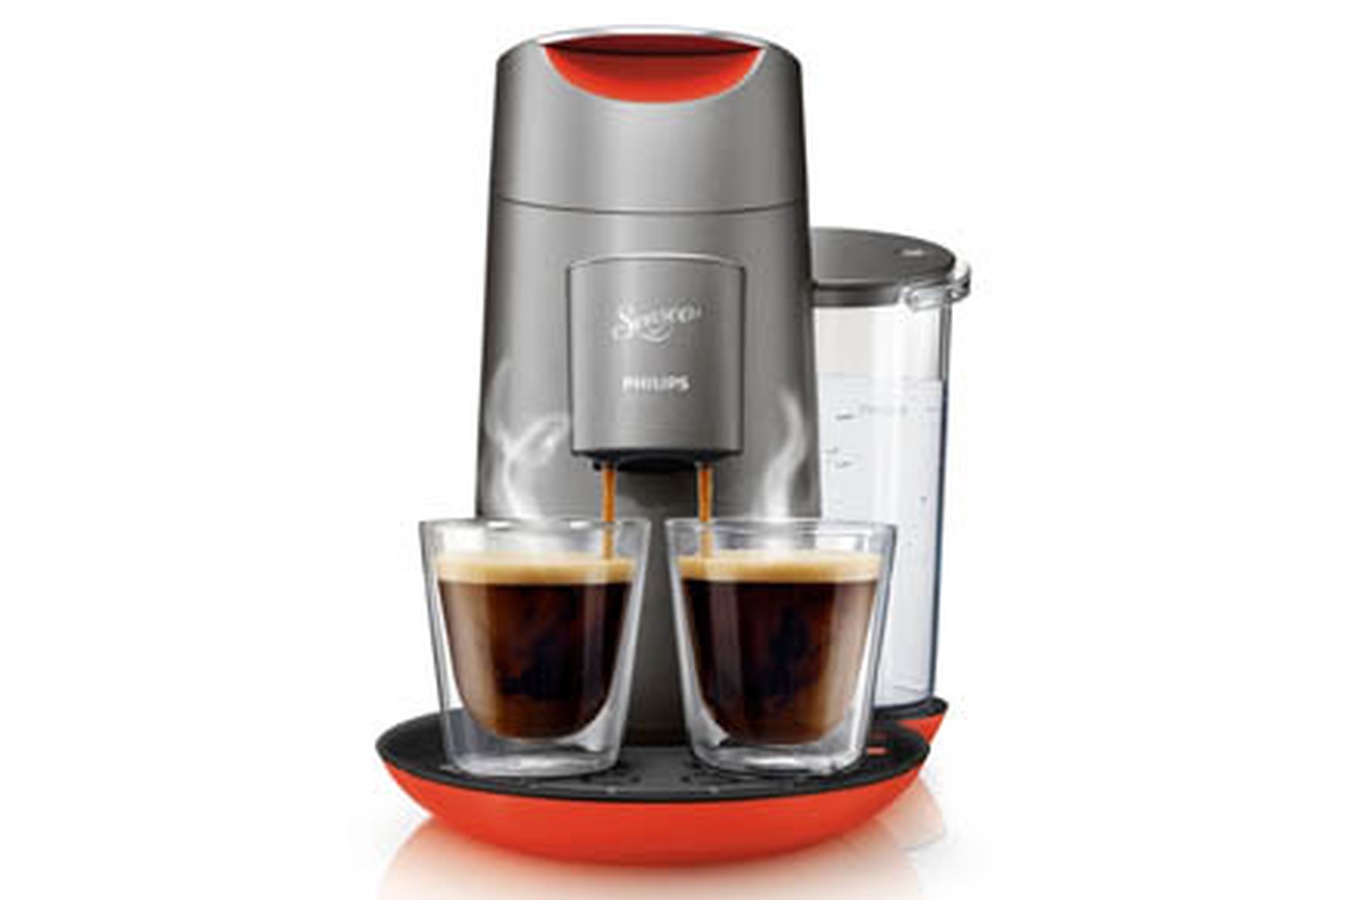 Changer Joint Cafetiere Senseo - Vidéo Dailymotion